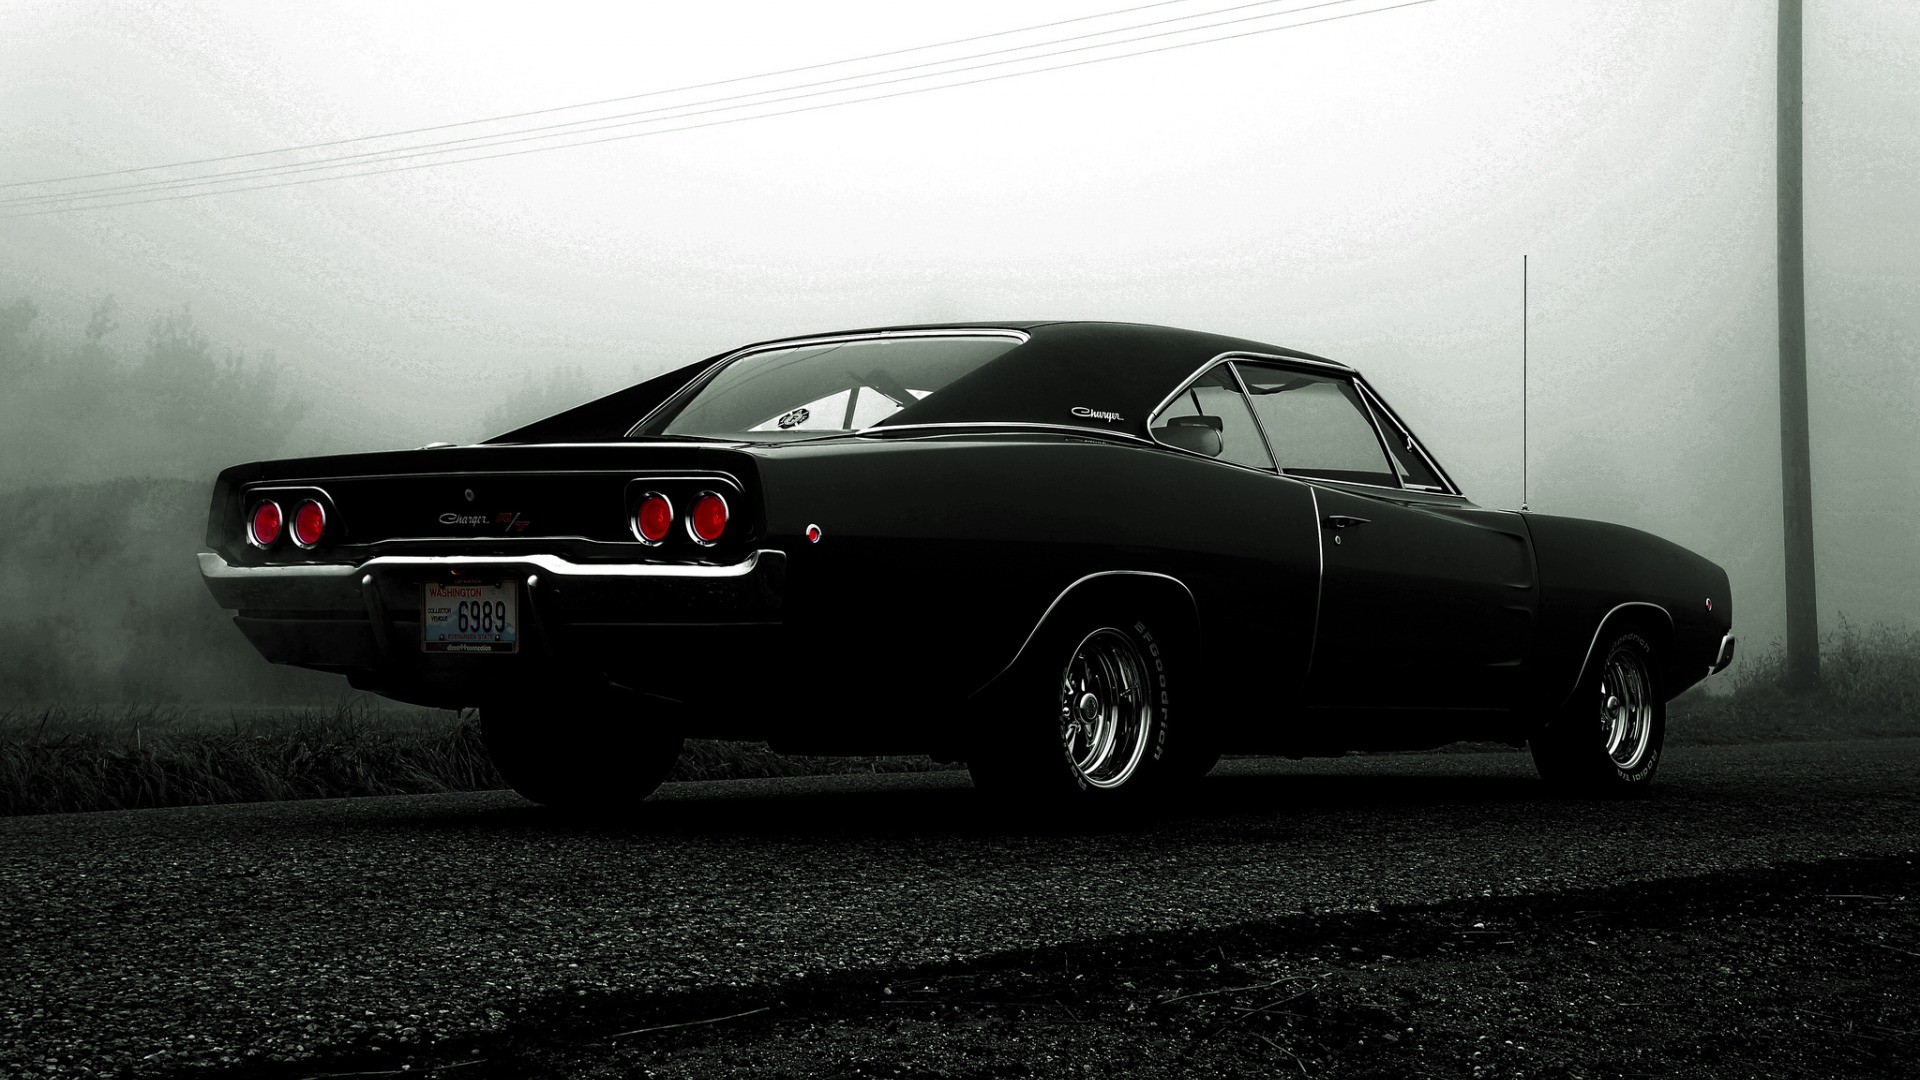 Car Dodge Charger Dodge Dodge Charger R T Dodge Charger R T 1968 Road Muscle Cars Black Cars 1920x1080